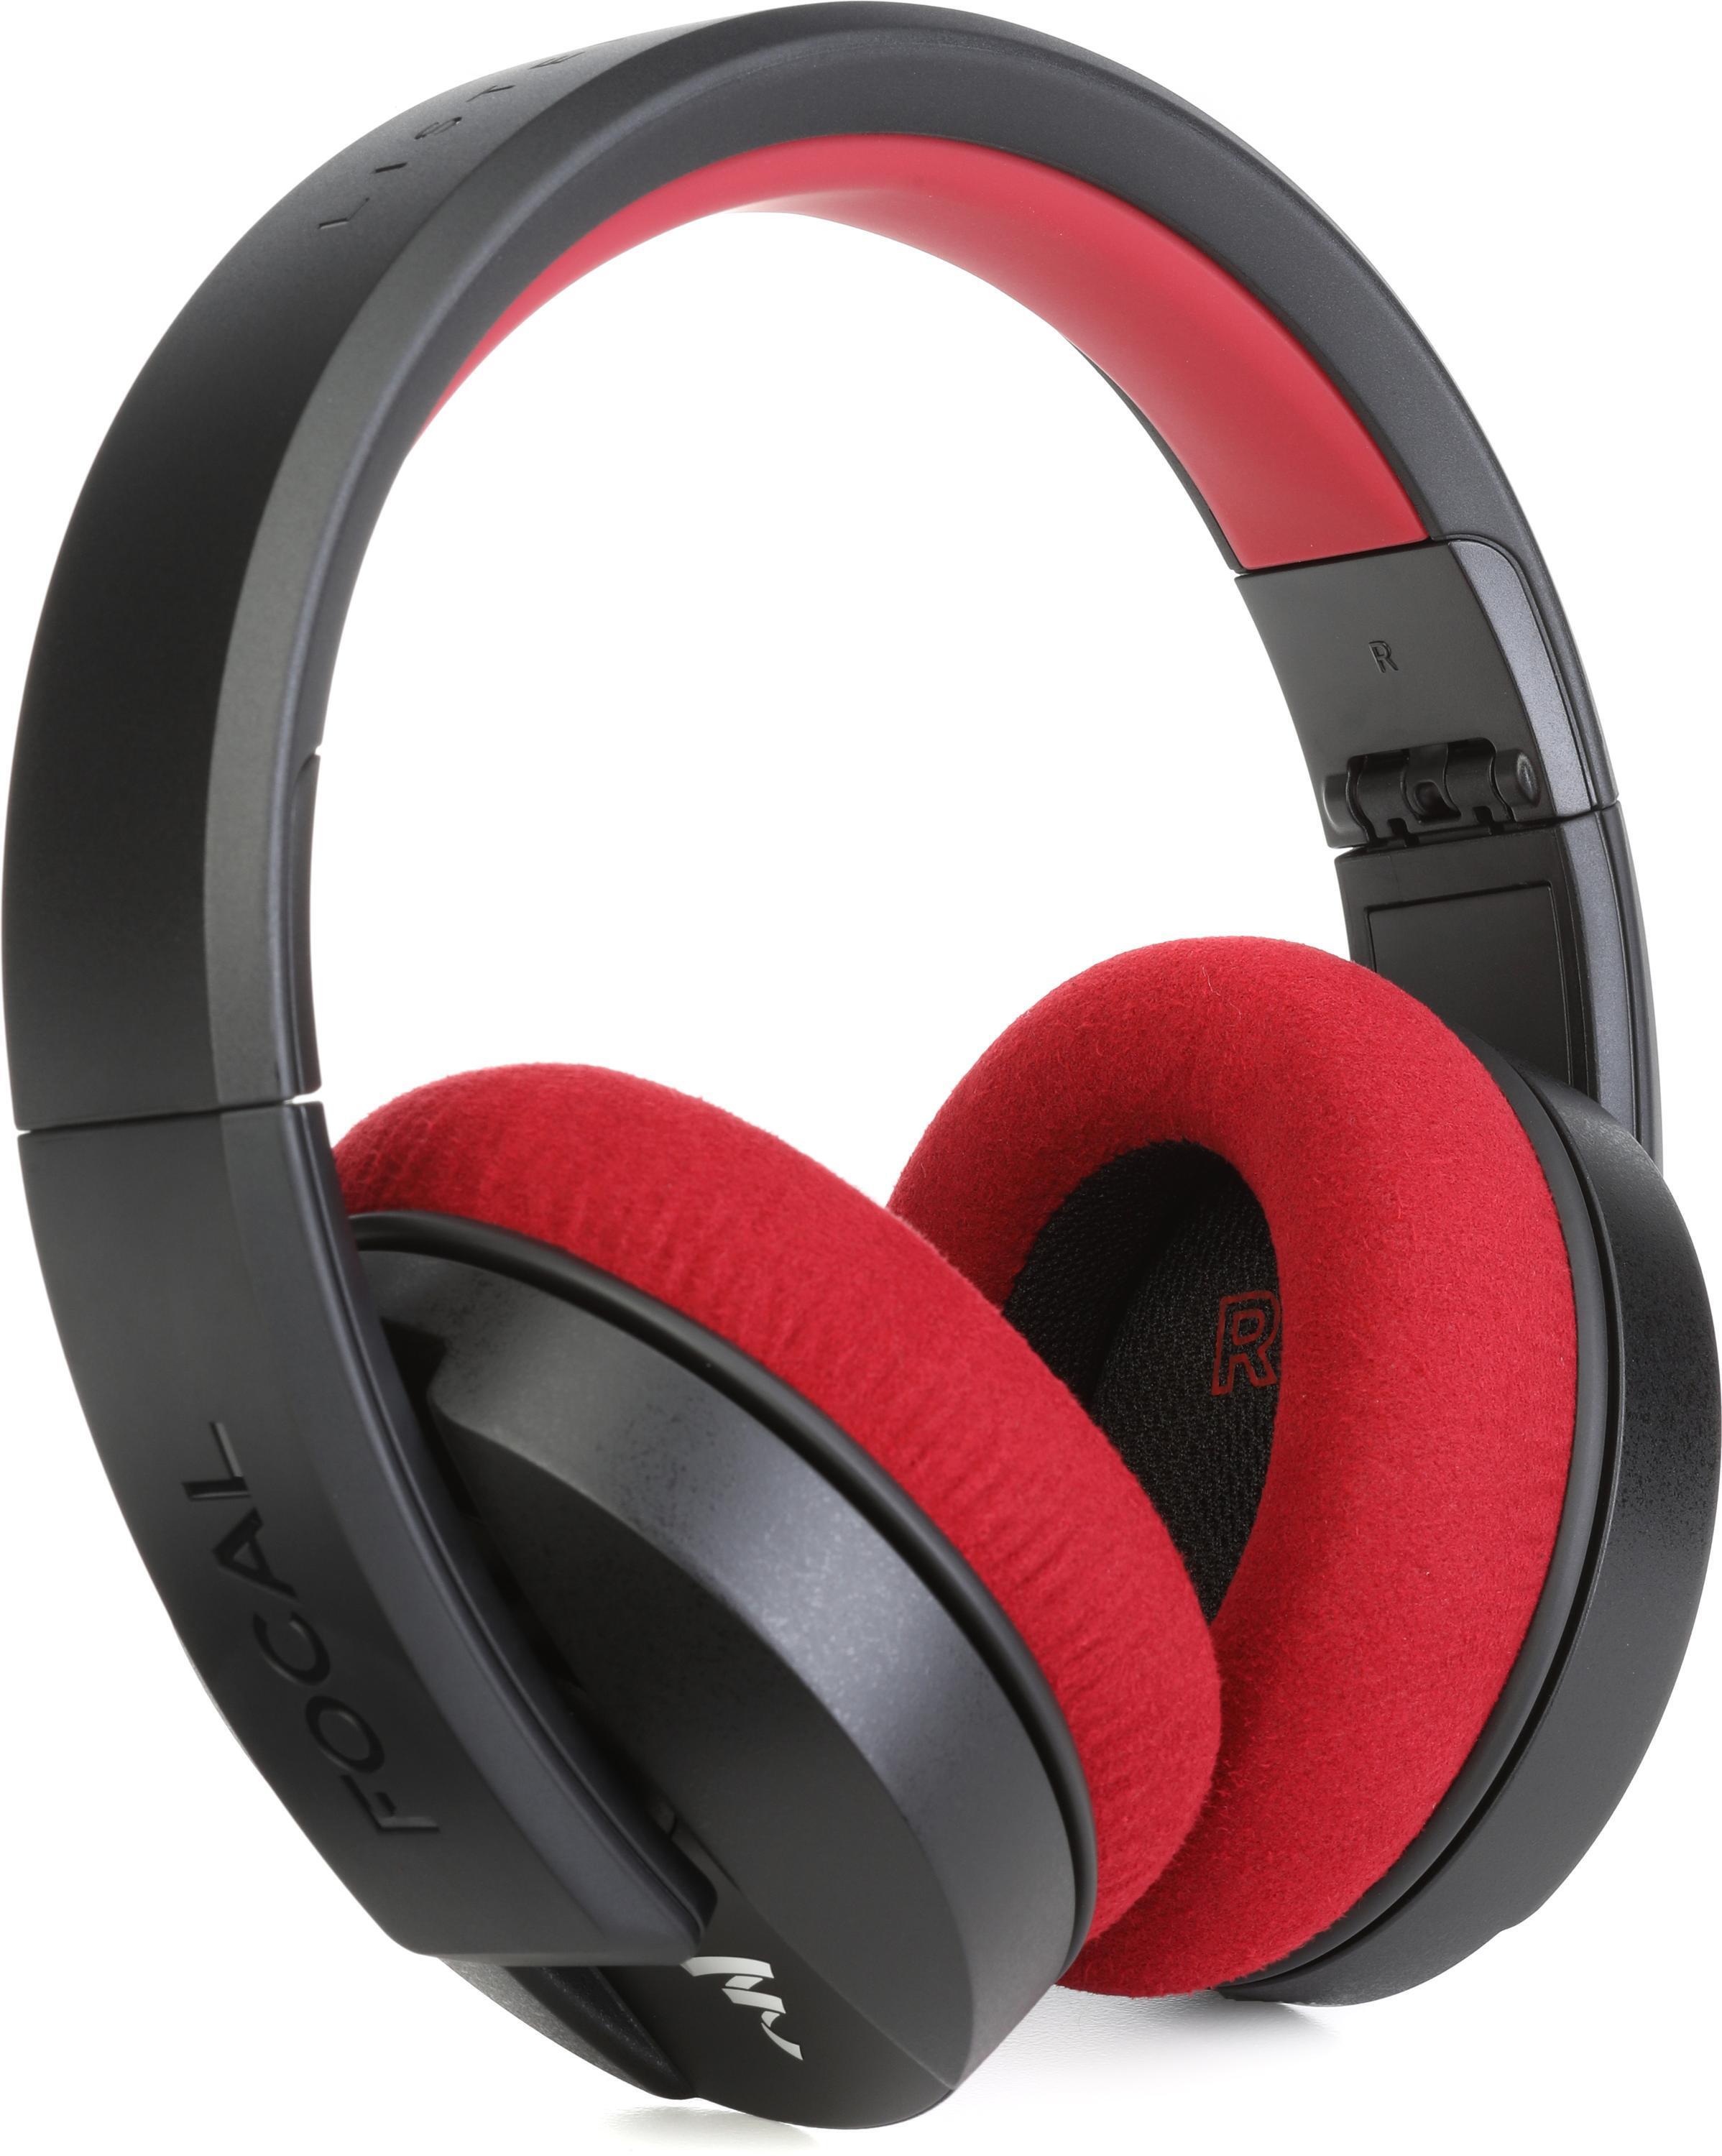 Flare PRO 2HD - Reviews  Headphone Reviews and Discussion - Head